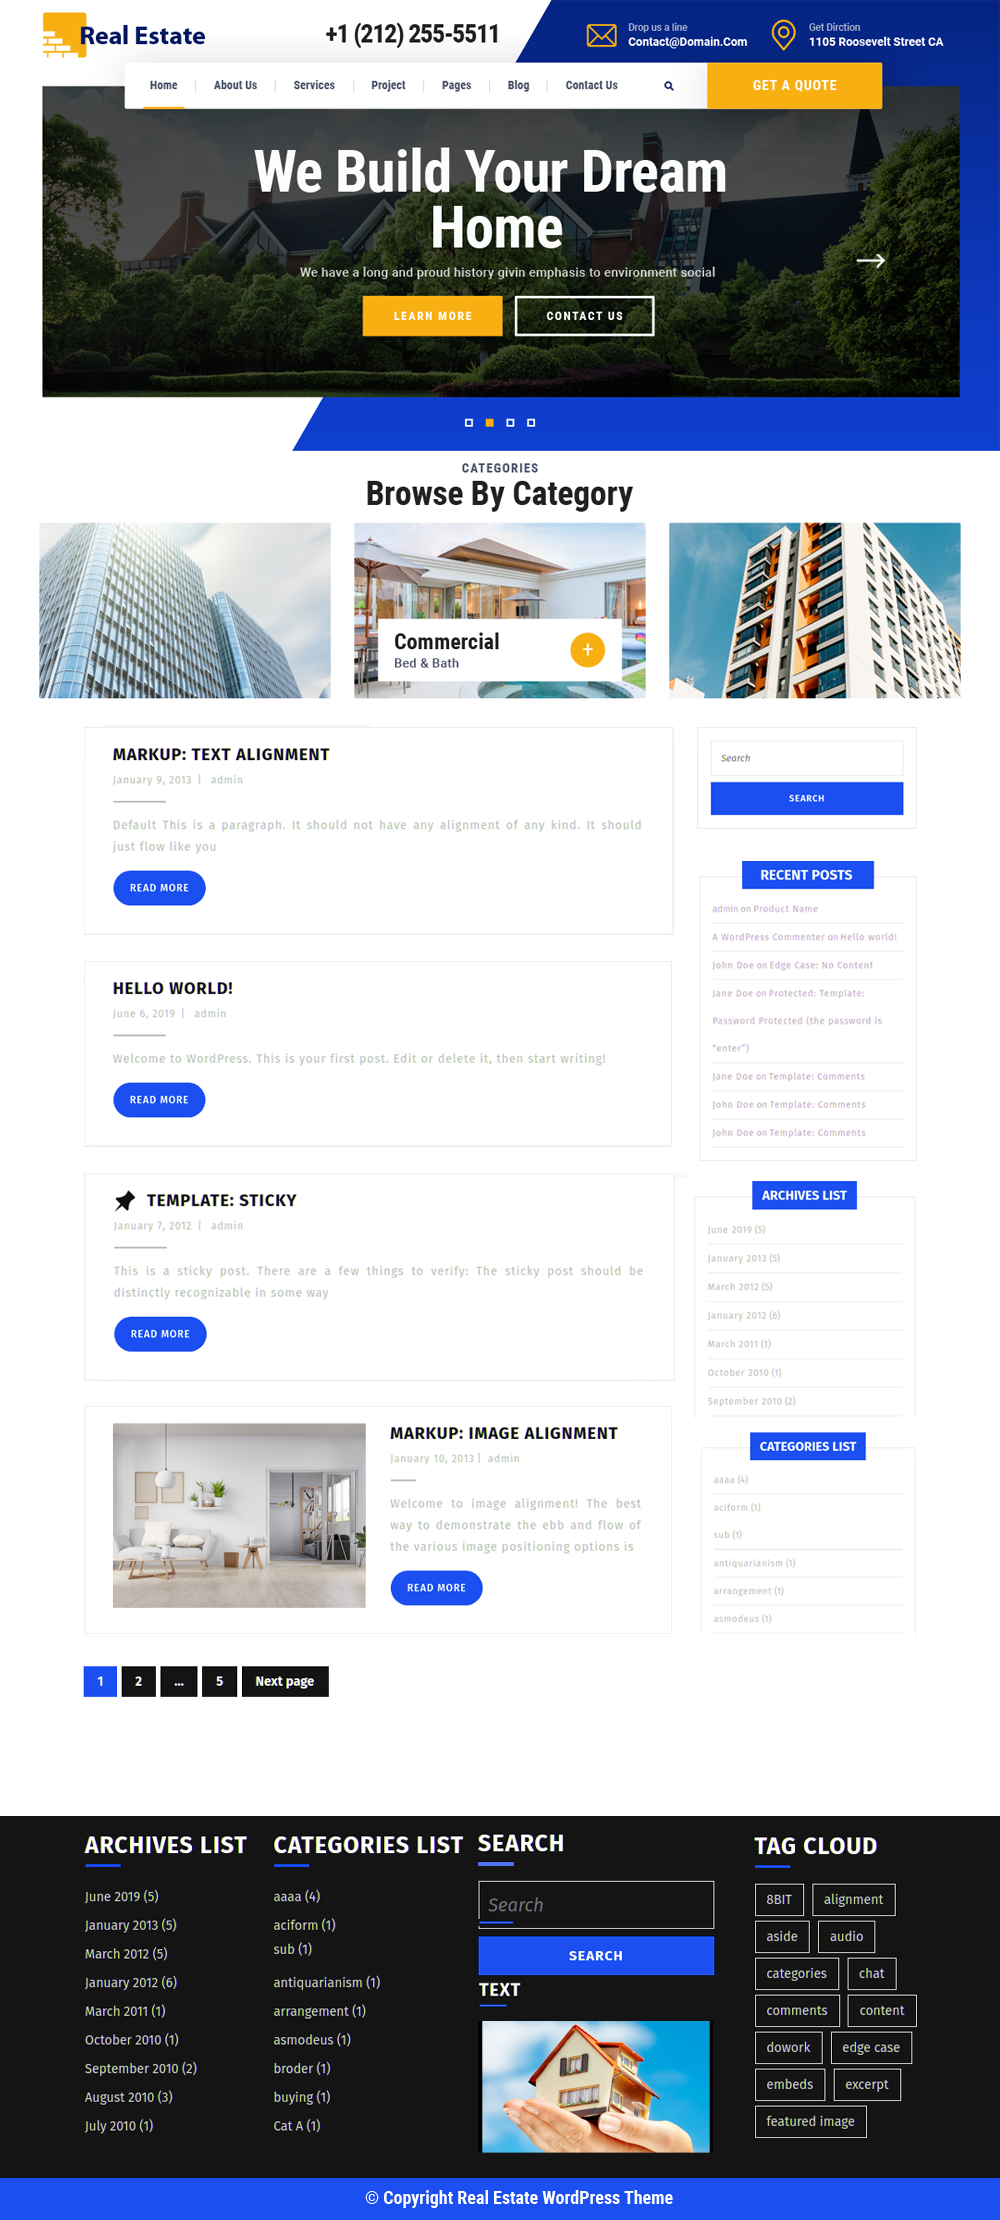 free-real-estate-wordpress-theme-for-real-estate-business